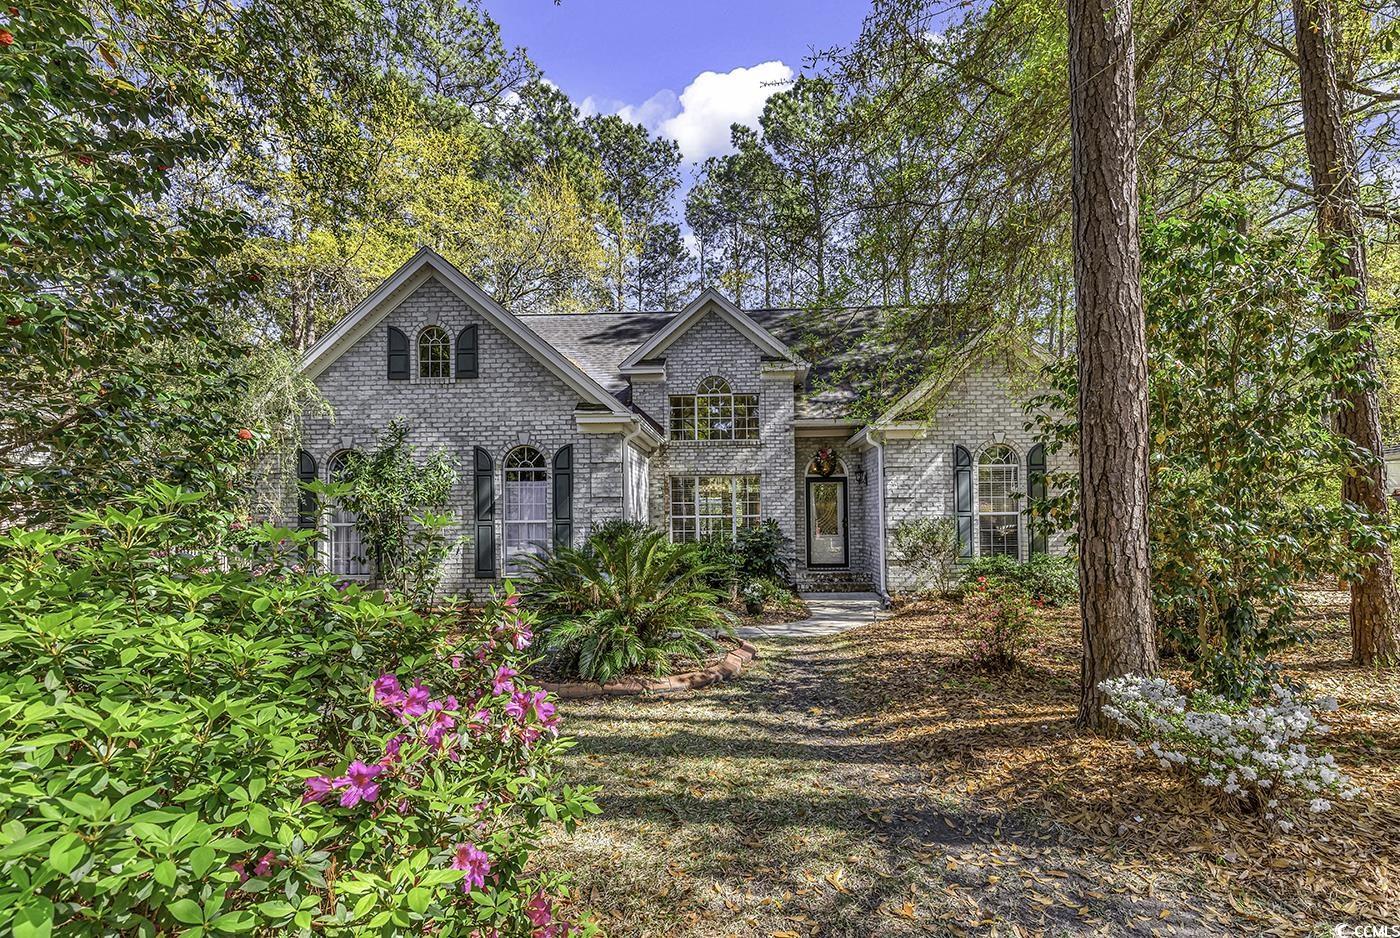 make nature your neighbor! set amongst majestic mature landscaping where colorful azaleas abound! this traditional river club home overlooks large pond from rear deck and offers a plethera of options for the outdoor enthuasist... gardening, room for a pool..or simply bird and wildlife viewing! vaulted ceilings in the family room are anchored by gas fireplace and wall of windows to let in natural light. a split bedroom design offers space for all and a formal dining area offer multiple dining and entertaining options. the river club offers a puclic golf course, community pool and private beach access to all litchfield by the sea has to offer!